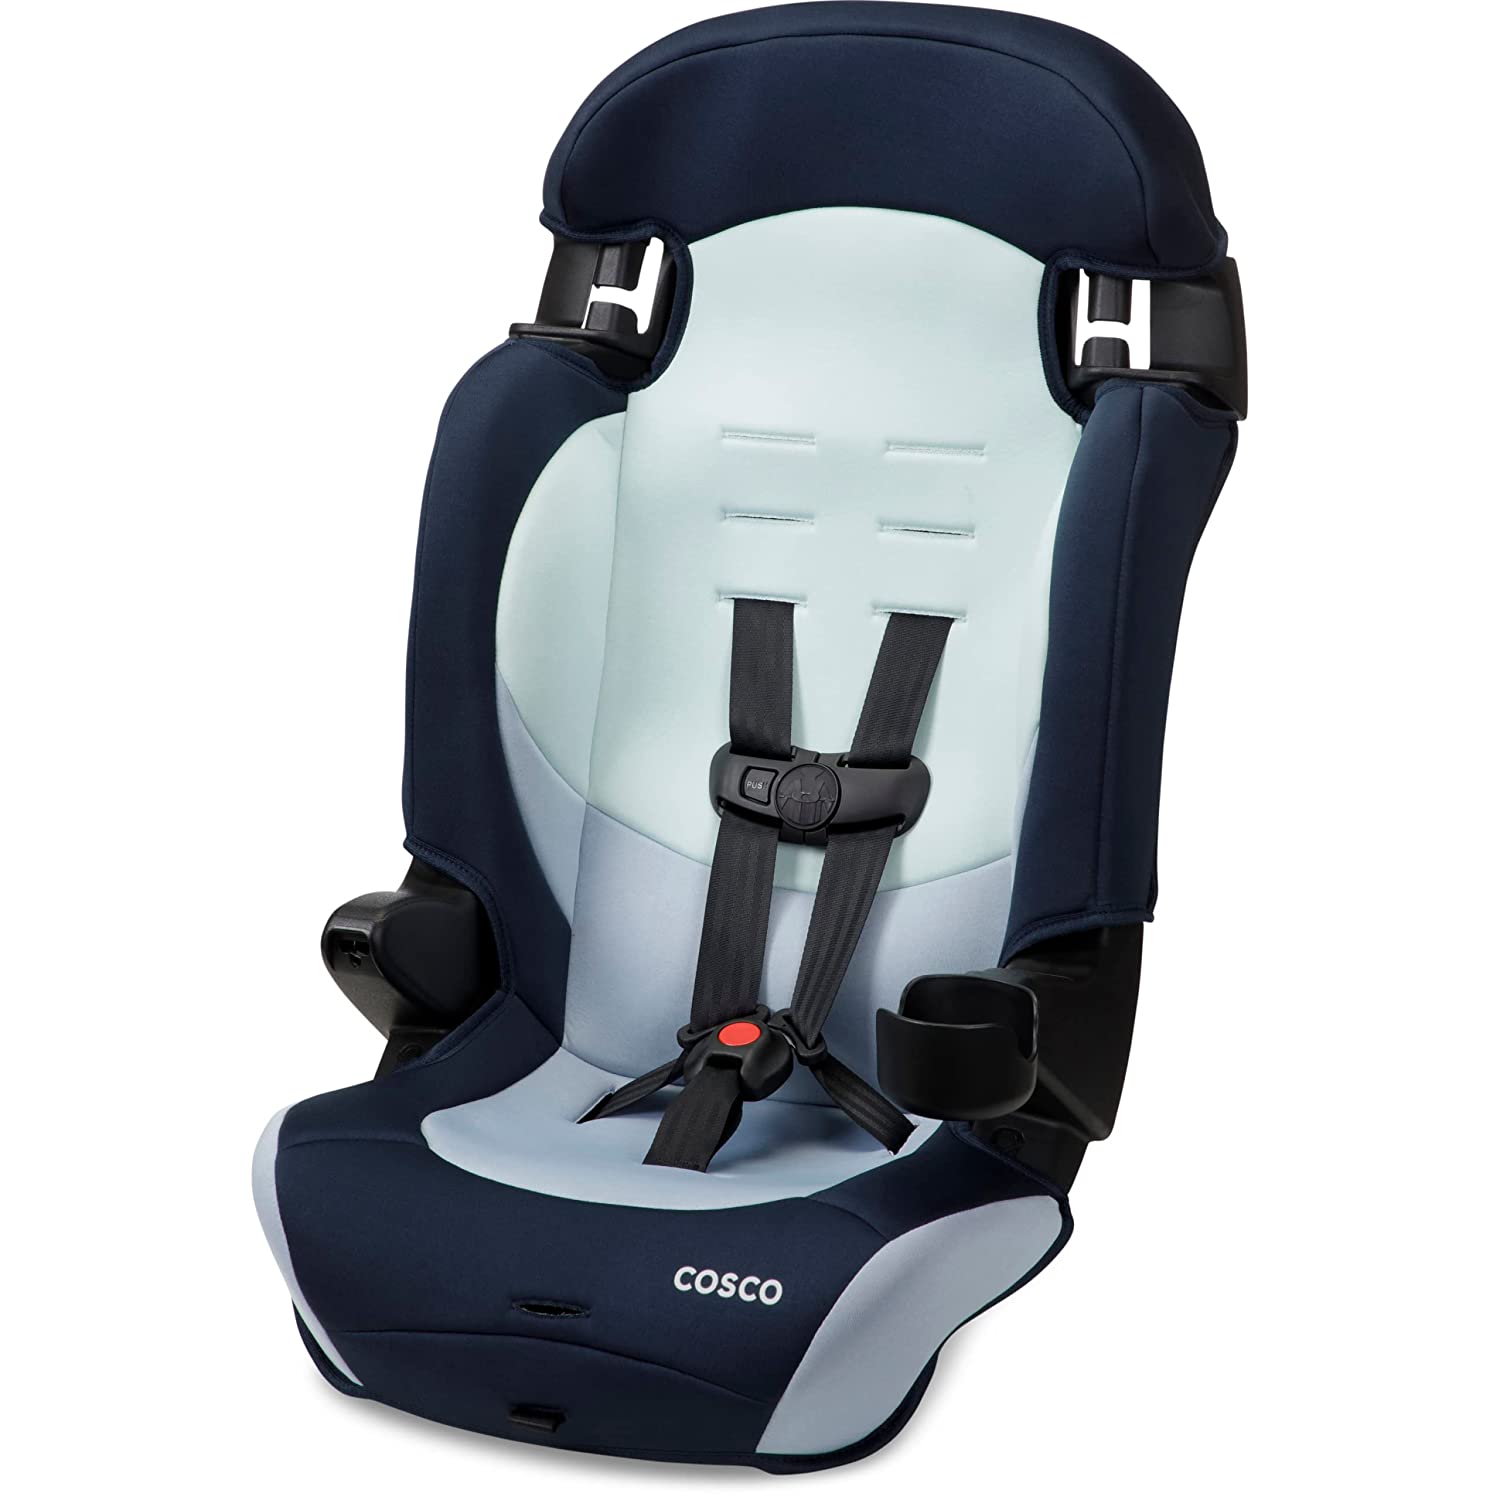 Cosco Finale DX 2-in-1 Booster Car Seat, Rainbow, Toddler - image 1 of 8